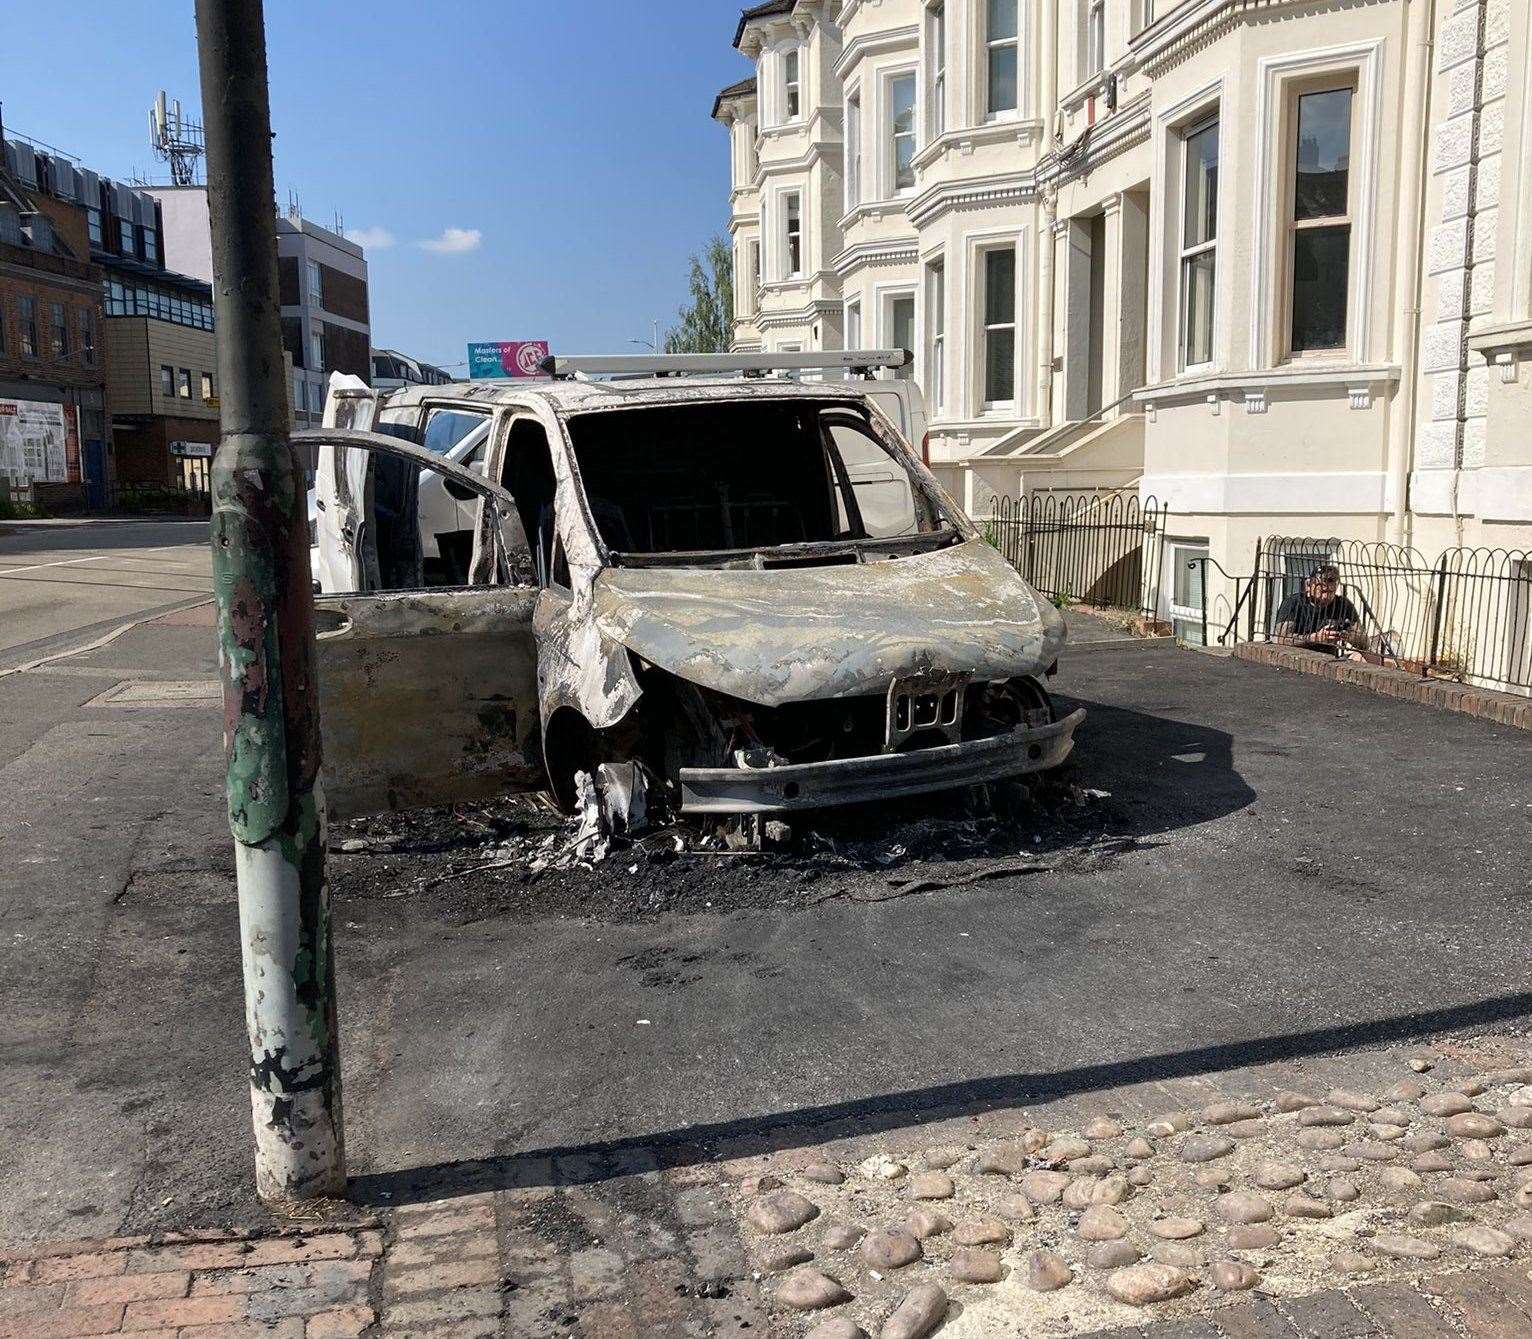 The burnt out van in St John's Road. Picture: @Monkex on Twitter